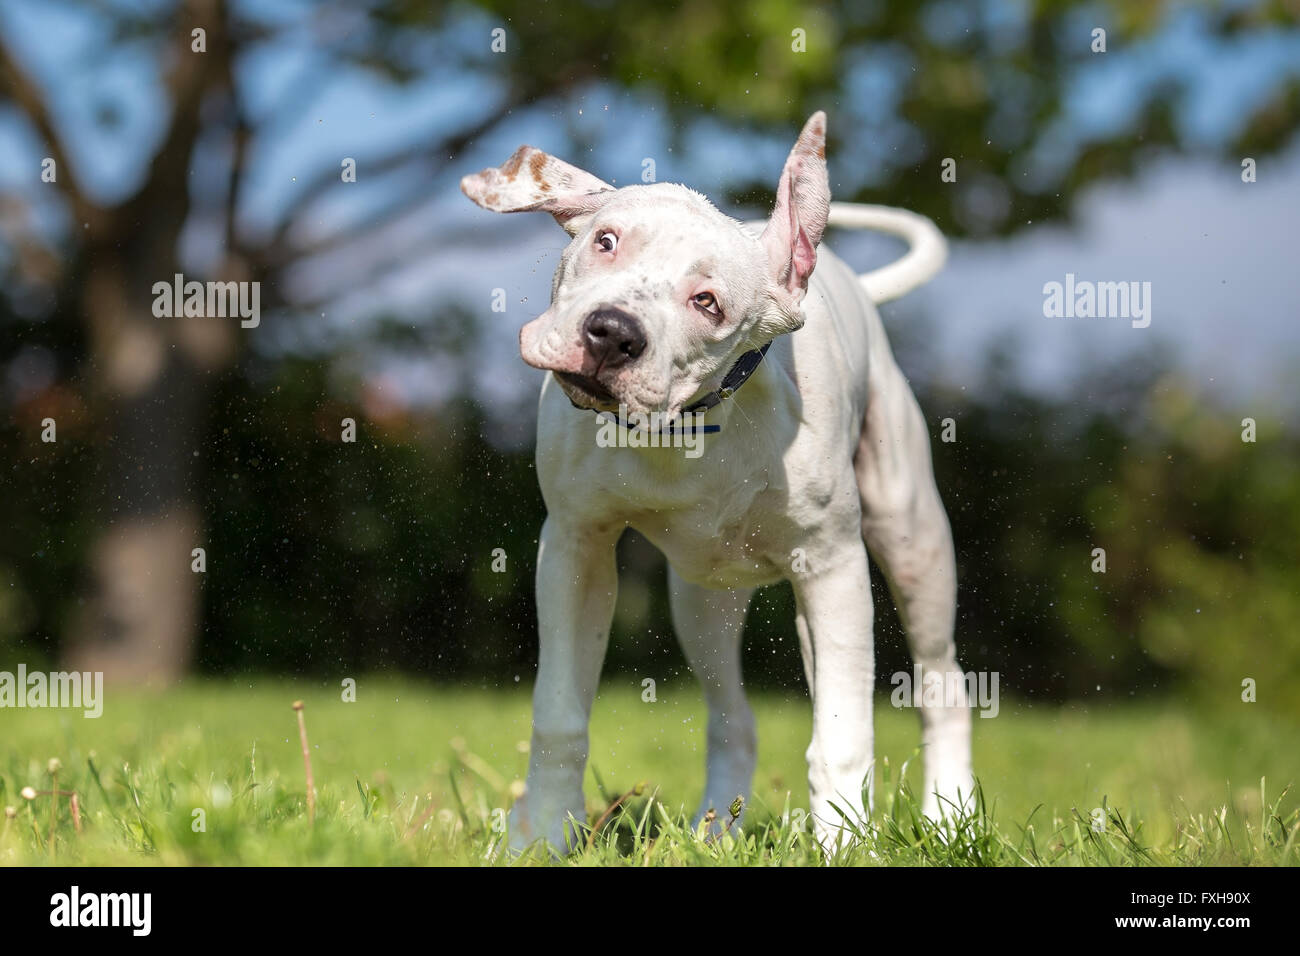 White American Staffordshire Terrier young dog shaking off water Stock Photo